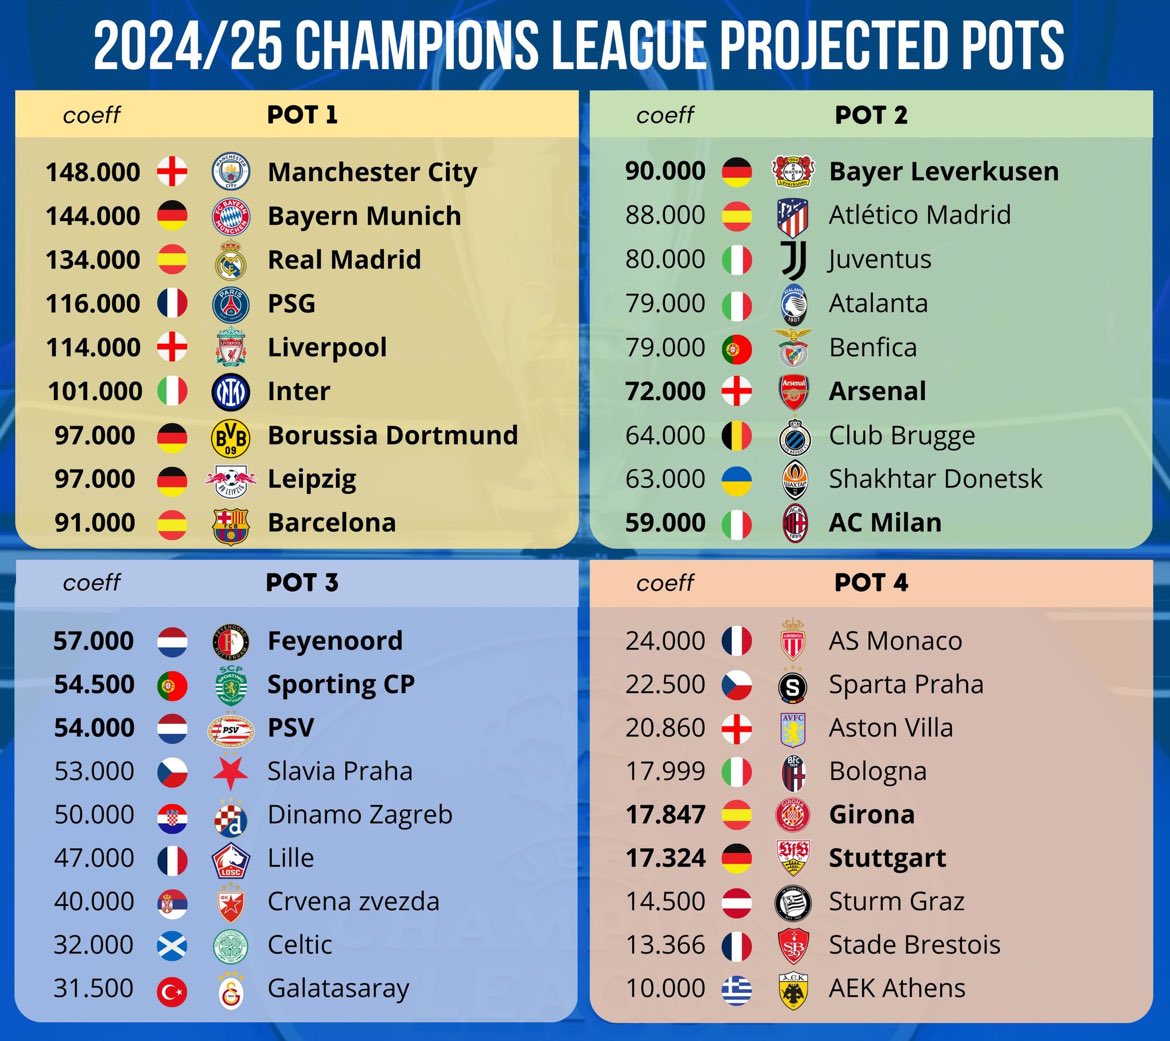 🚨 Juventus are expected to be in the POT 2 of the Champions League 24/25. Reminder that there will be a new format as opposed to four teams per pot in a group.